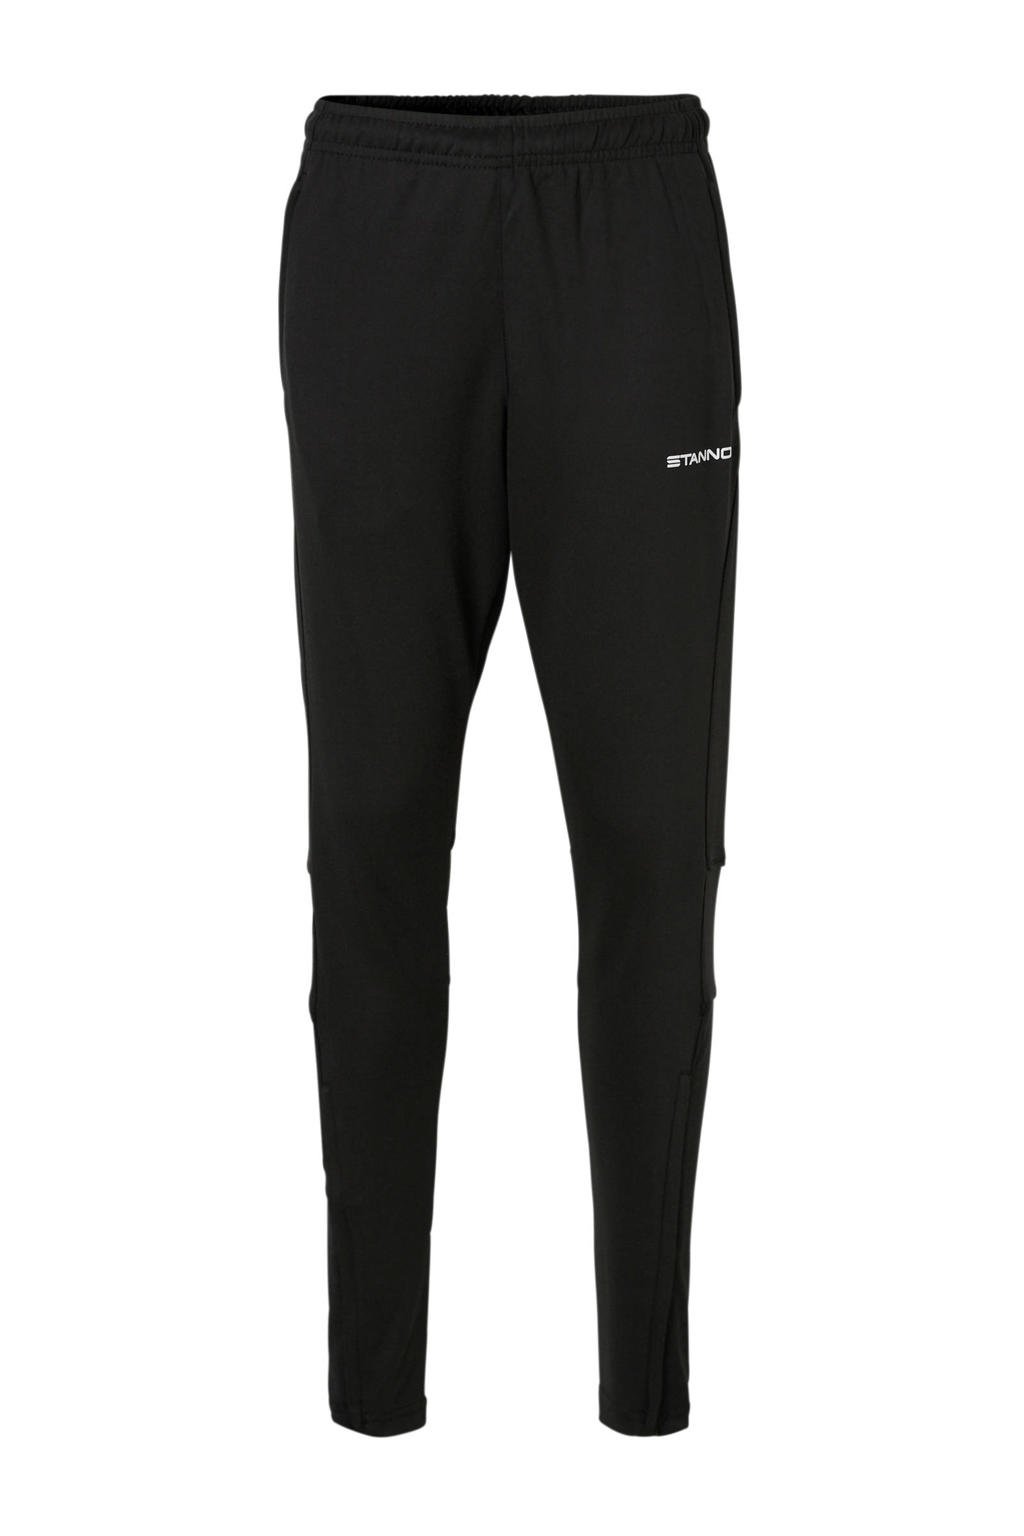 Stanno   Centro Fitted Pants trainingsbroek zwart